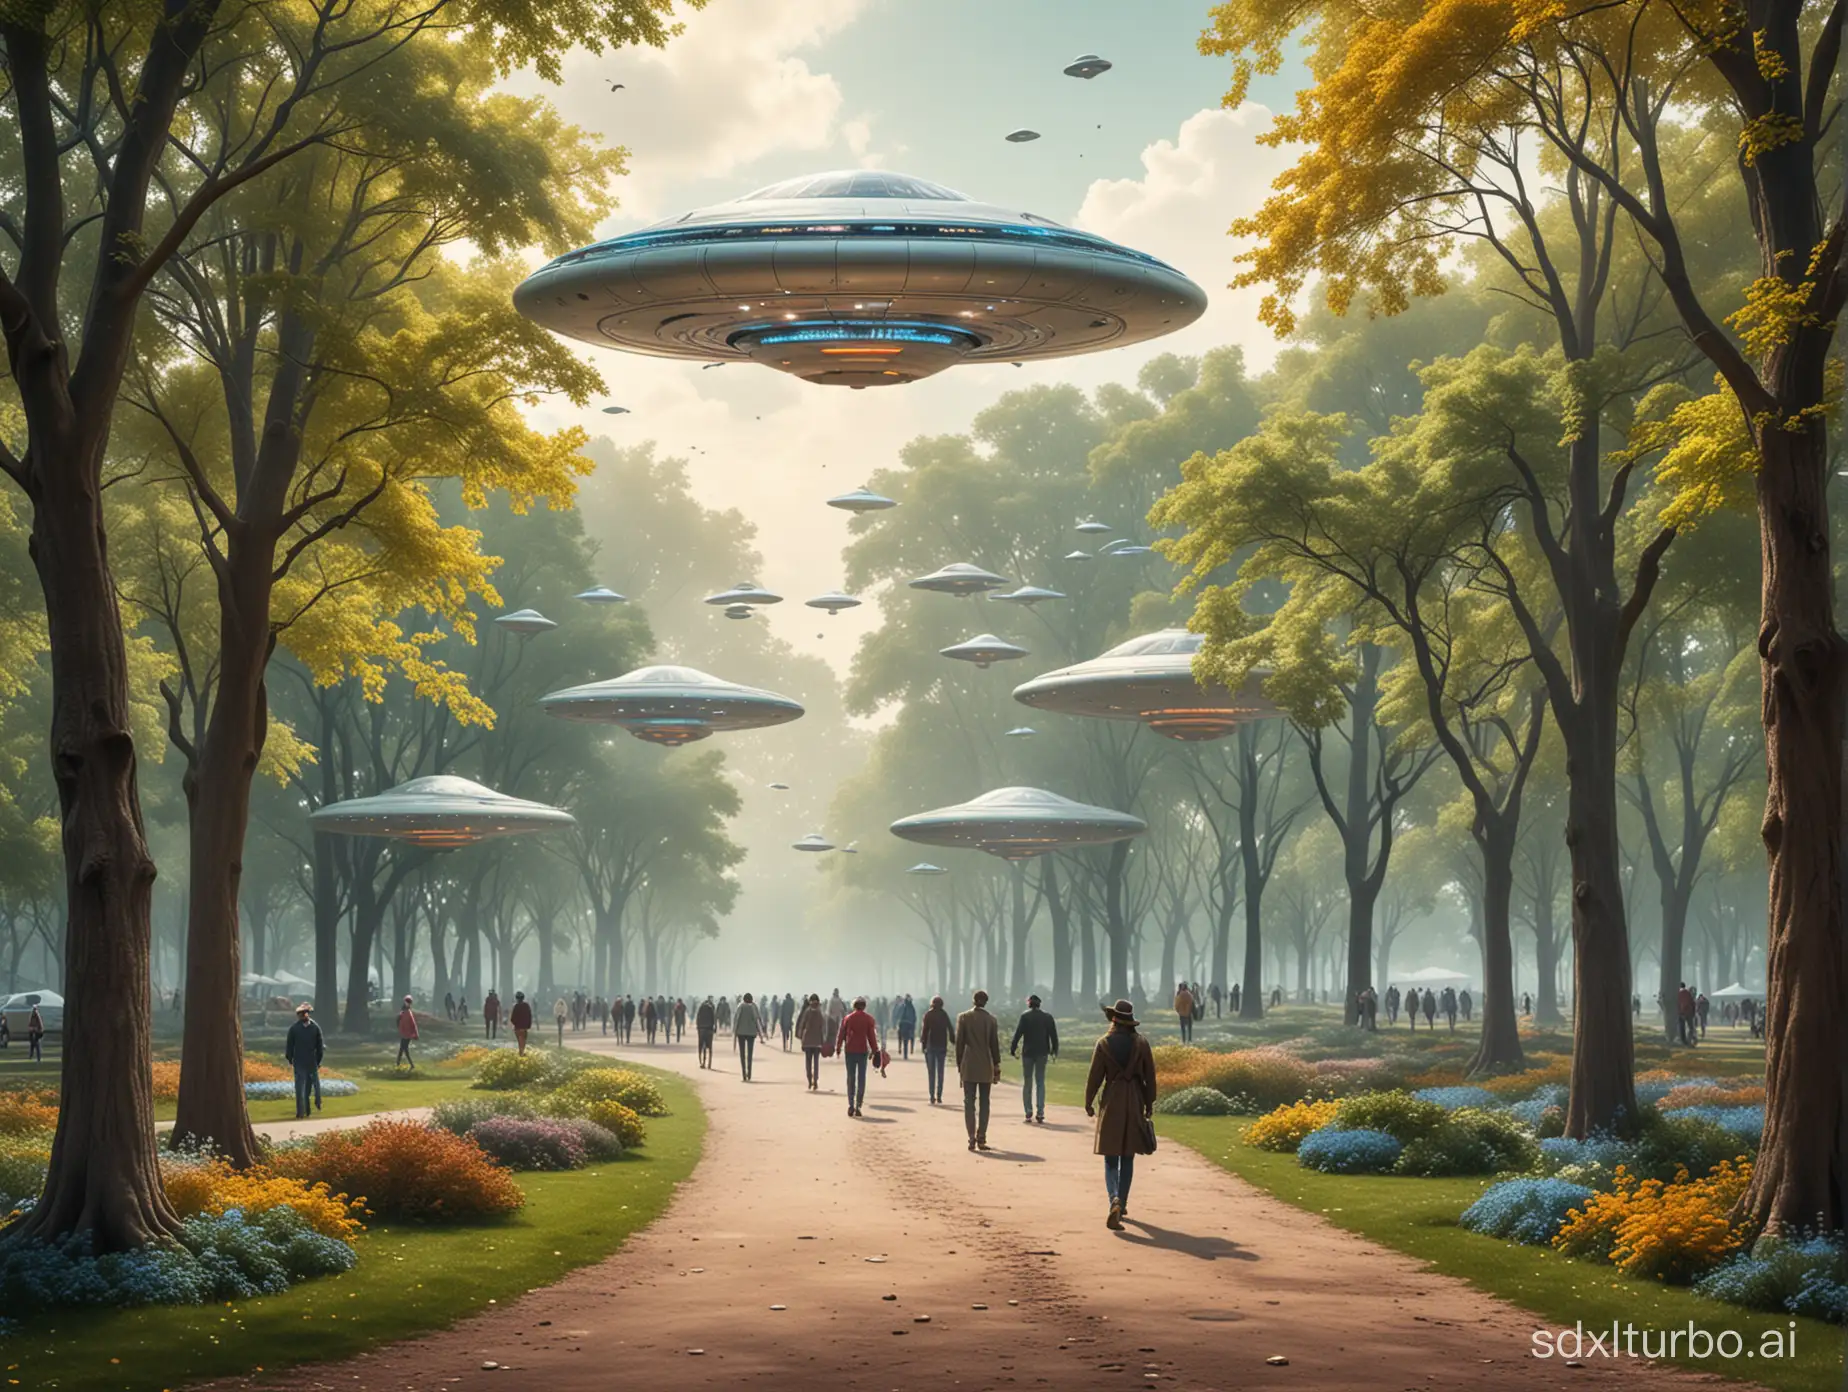 The park of the future with flying saucers and strolling people